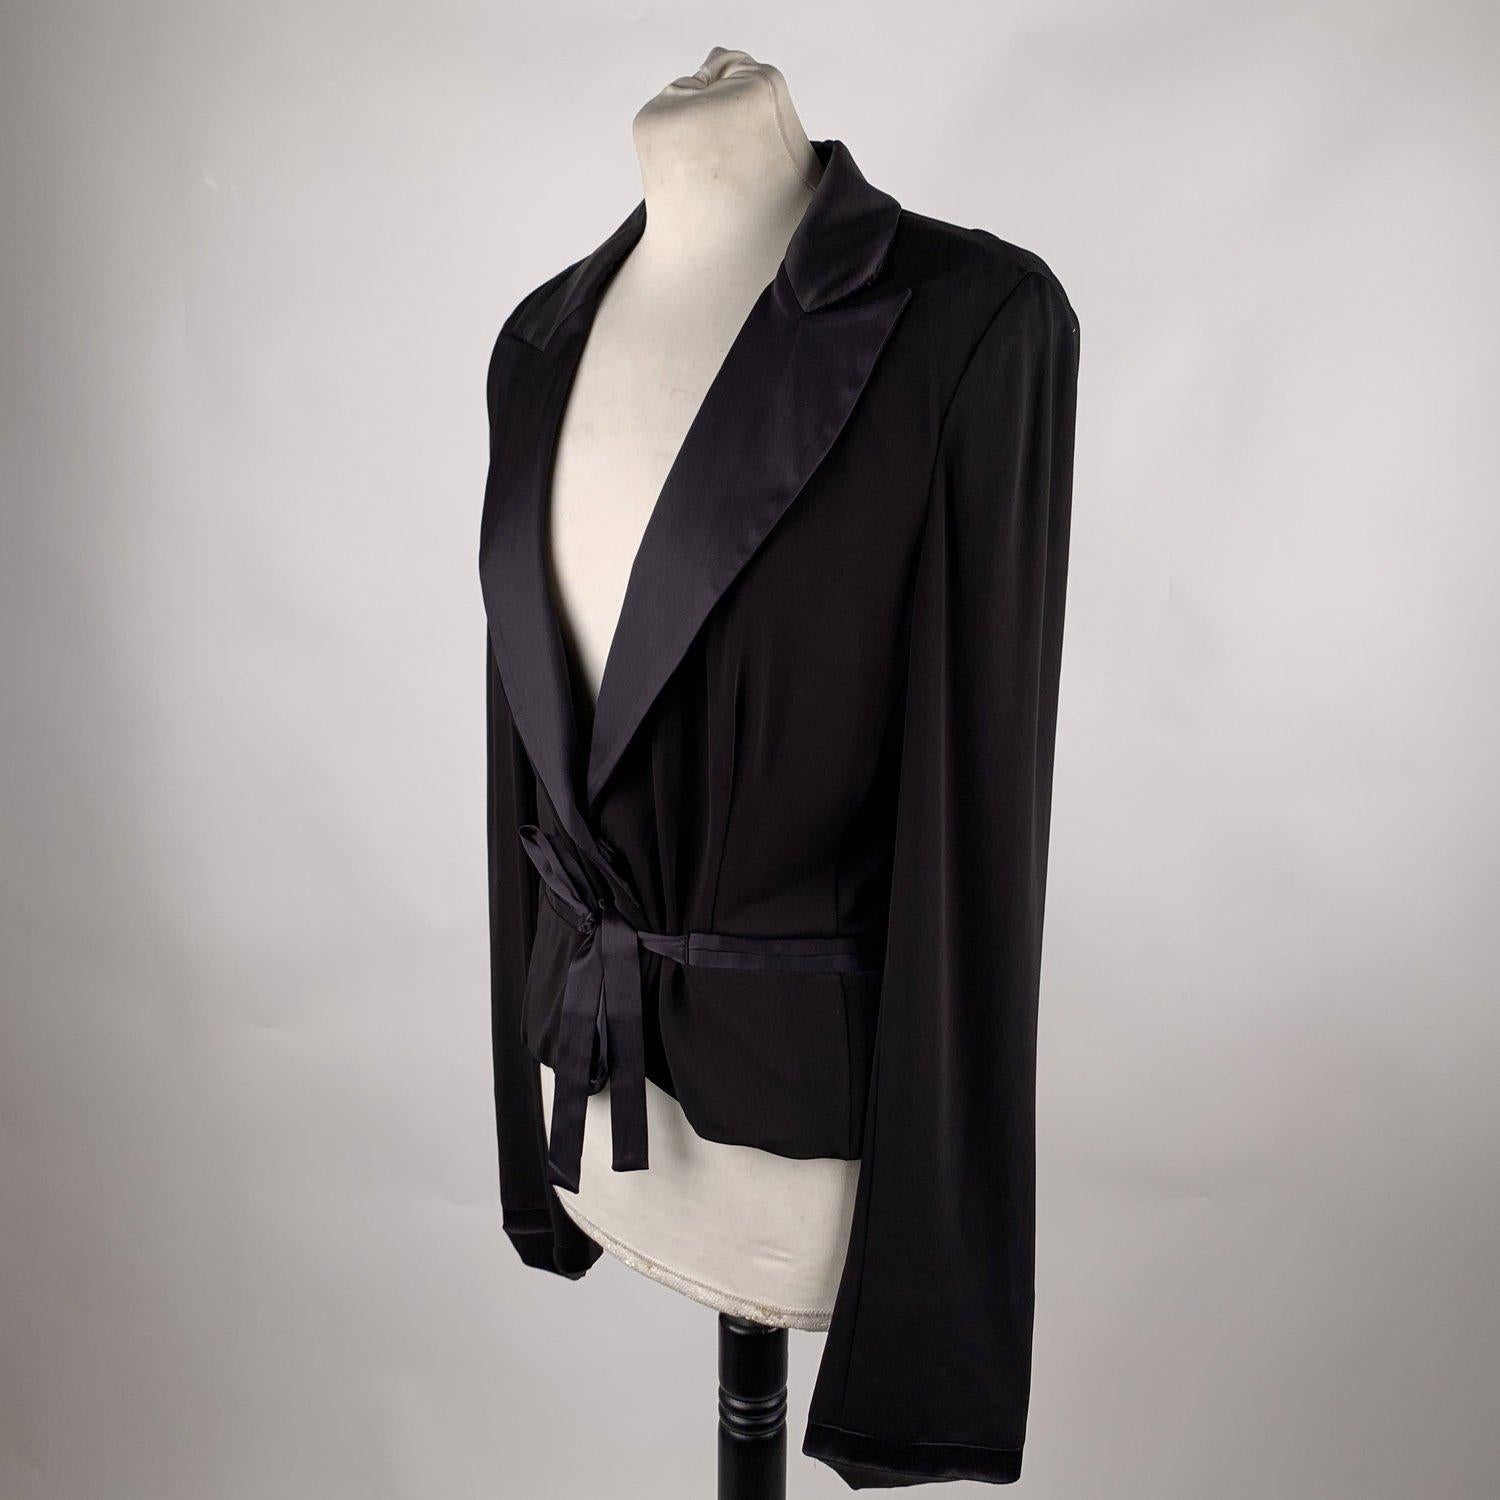 MATERIAL: Viscose COLOR: Black MODEL: Blazer GENDER: Women SIZE: Medium COUNTRY OF MANUFACTURE: Italy Condition CONDITION DETAILS: B :GOOD CONDITION - Some light wear of use - Gently used! The inside seams of the sleeves are unstitched Measurements